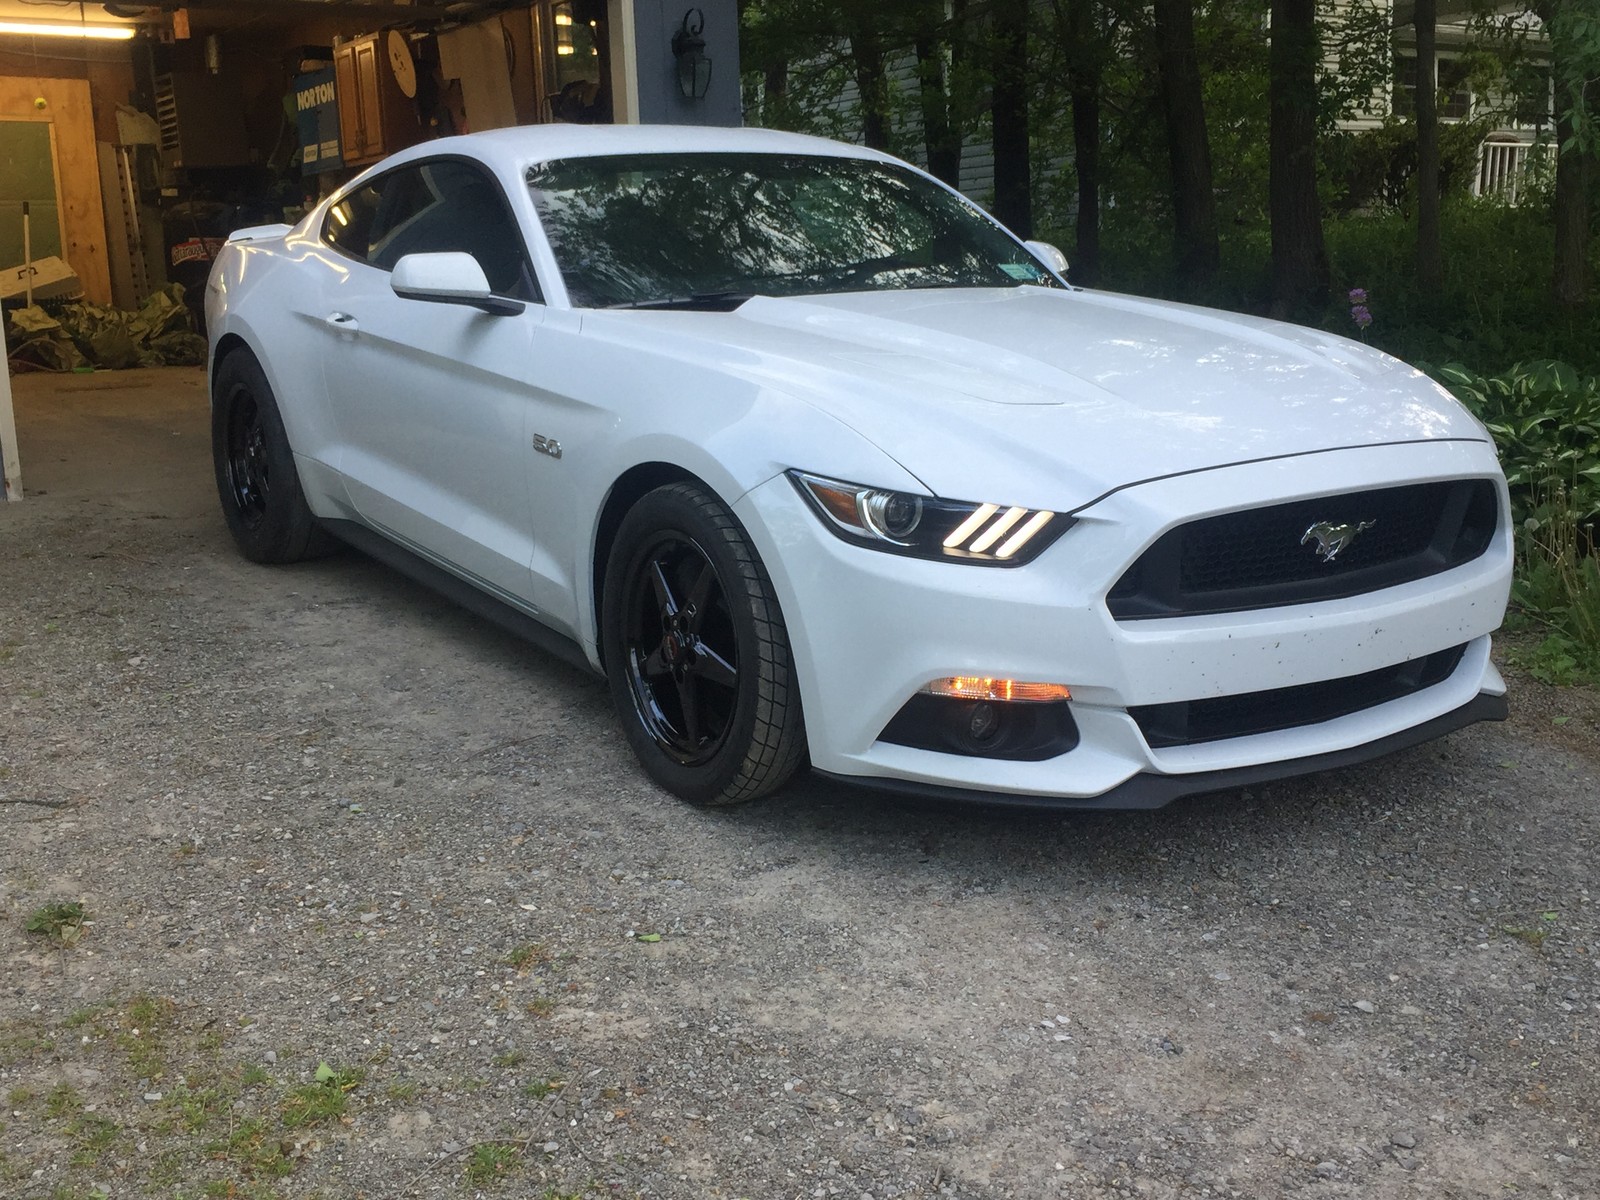  2016 Ford Mustang Gt